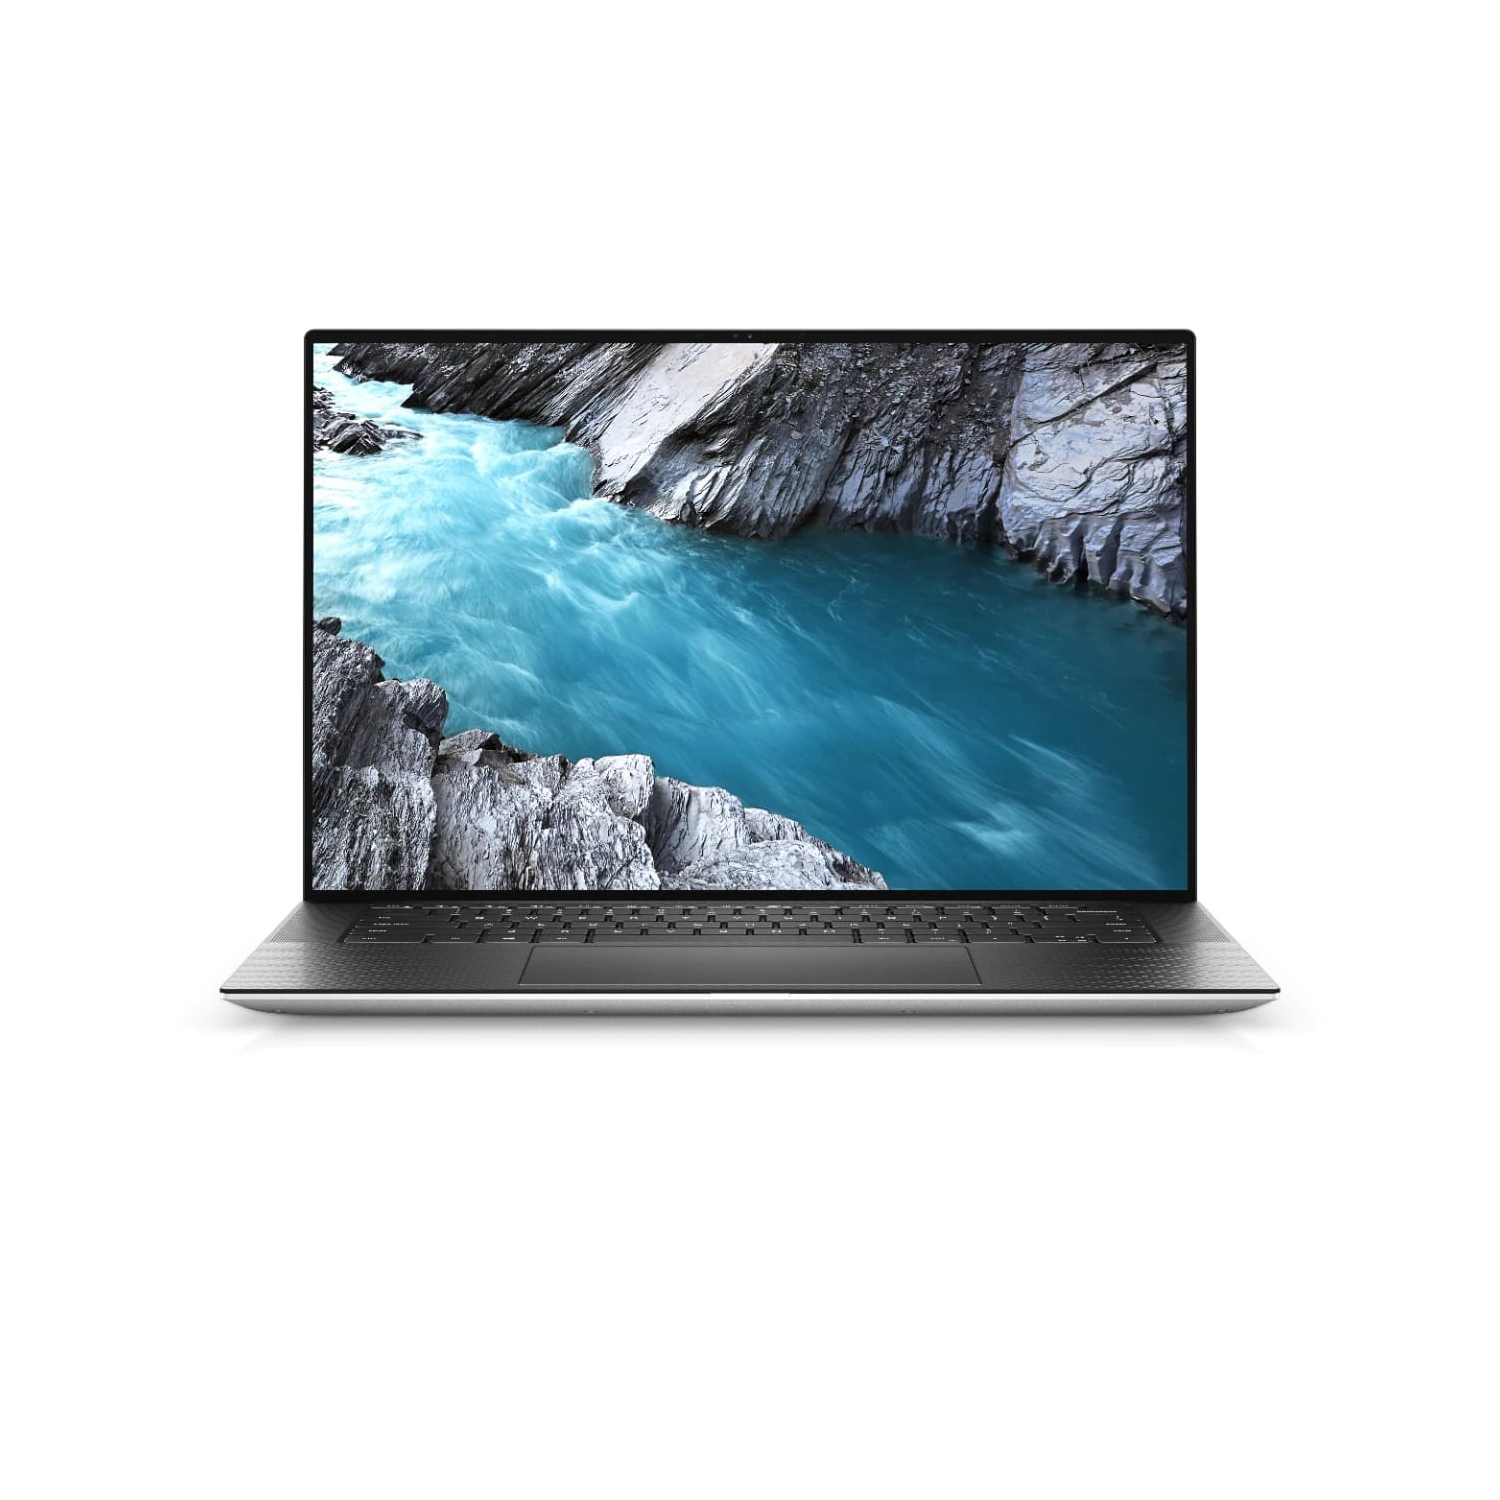 Refurbished (Excellent) - Dell XPS 15 9500 Laptop (2020), 15" 4K Touch, Core i9 - 512GB SSD - 32GB RAM - 1650 Ti, 8 Cores @ 5.3 GHz - 10th Gen CPU Certified Refurbished